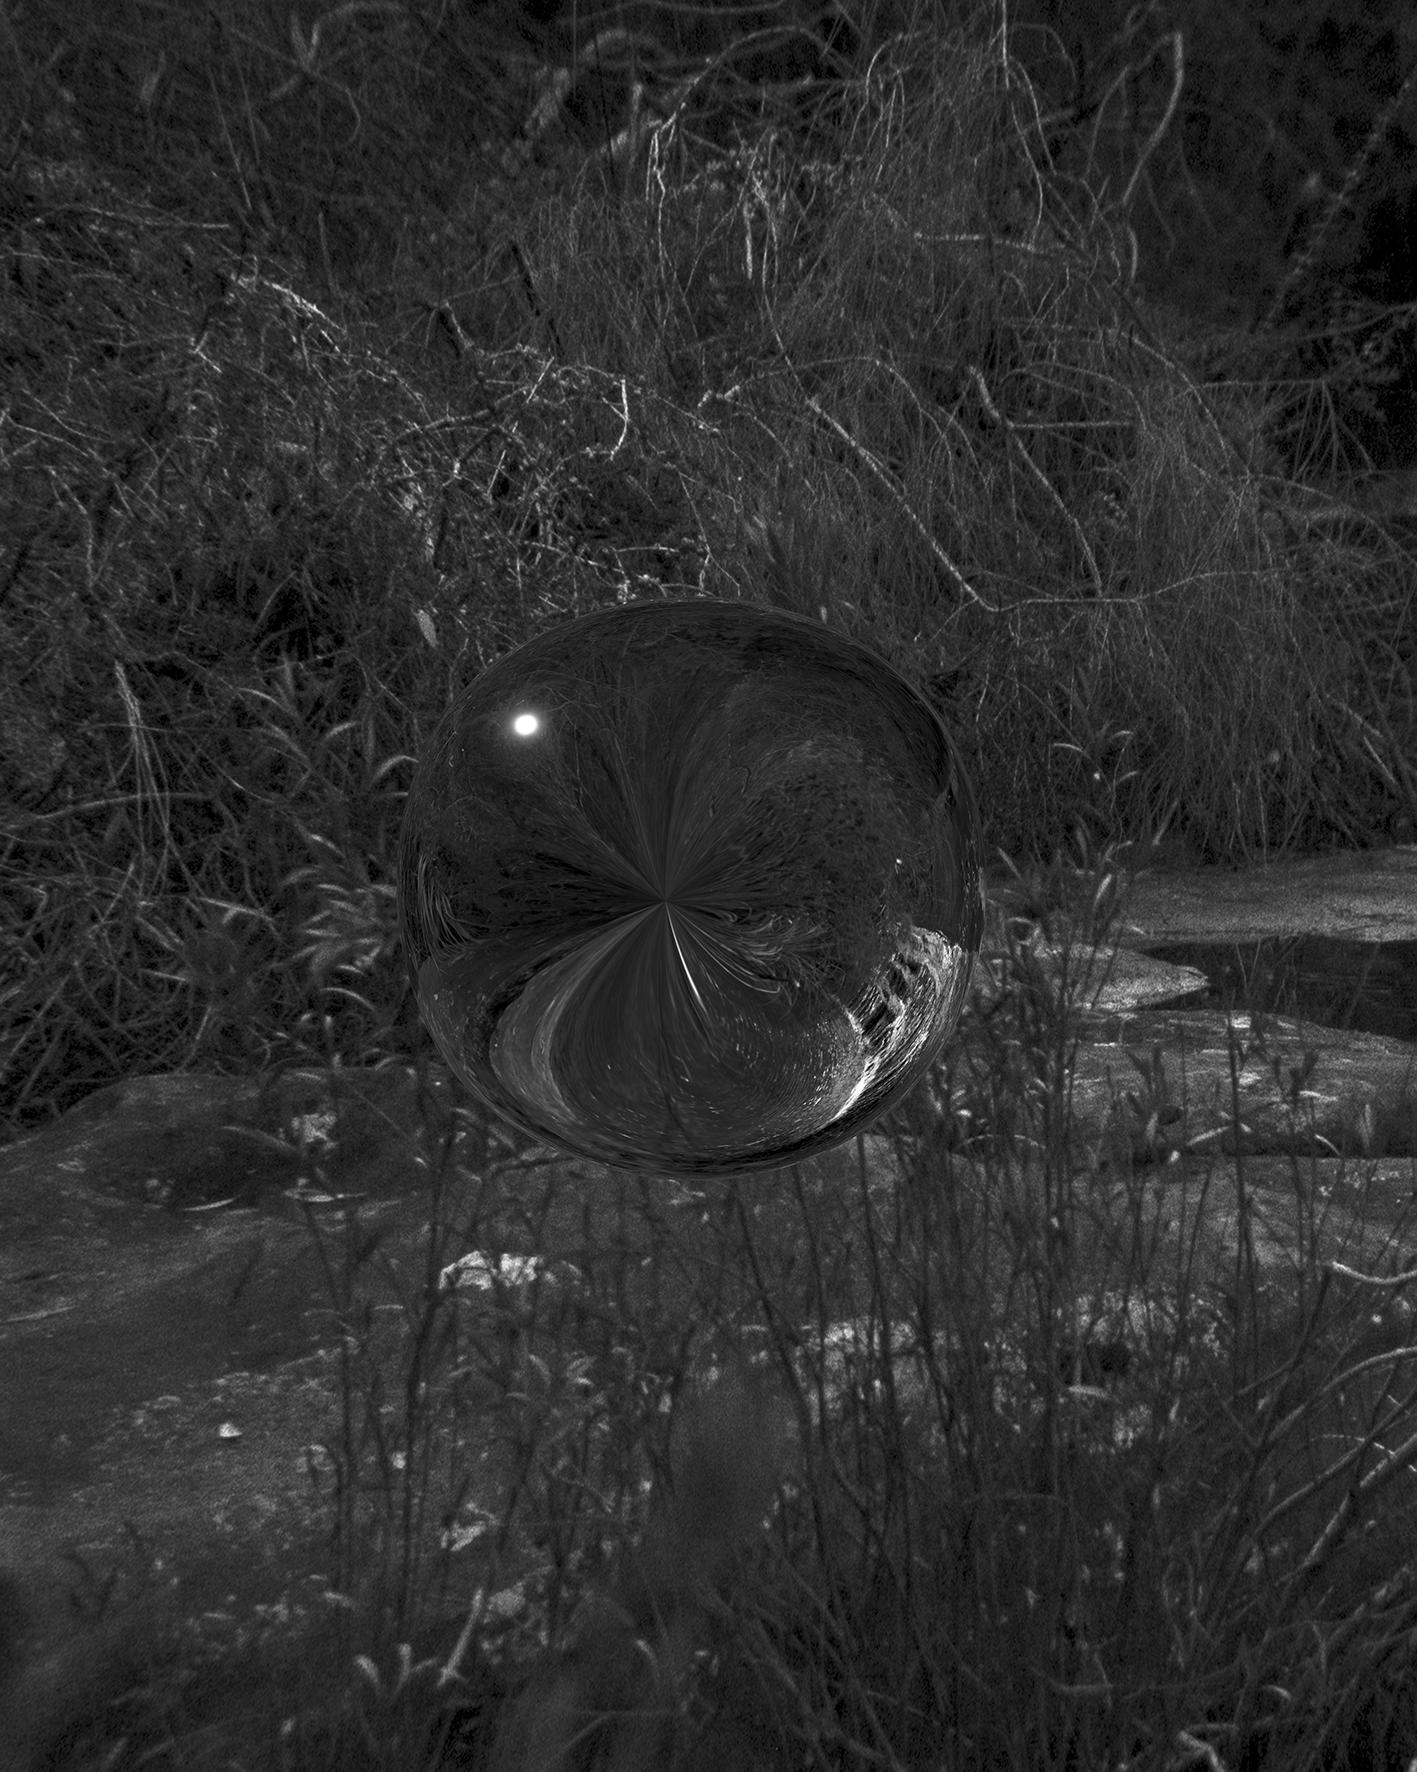 A black and white photograph of a reflective orb, floating in mid air, at night, amongst bushy trees and a water creek underneath.